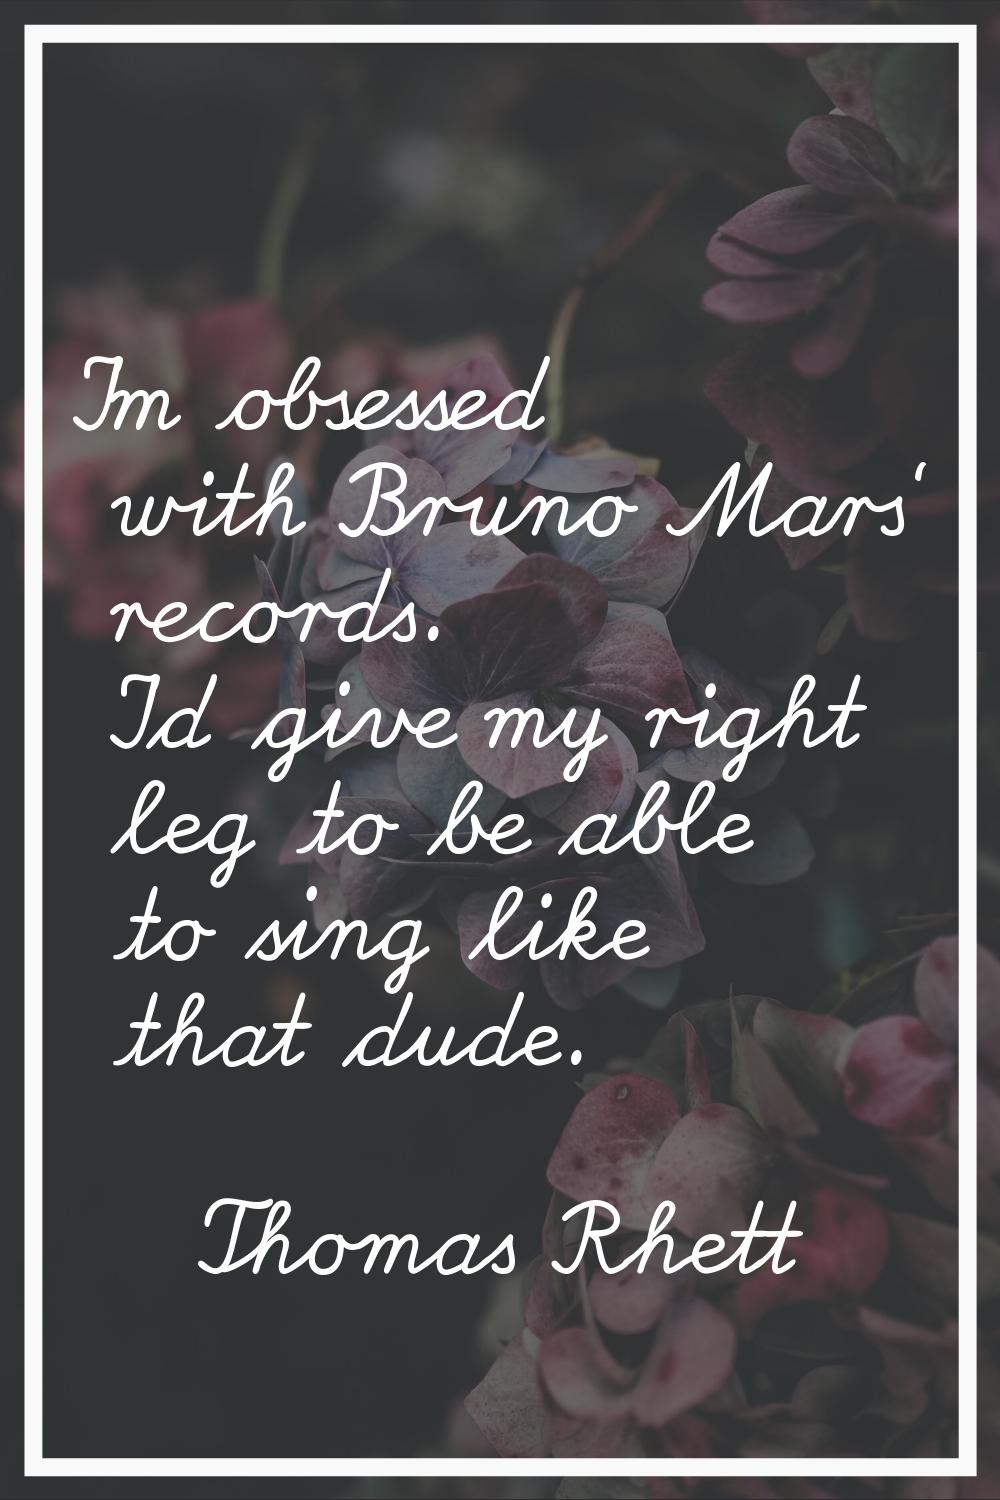 I'm obsessed with Bruno Mars' records. I'd give my right leg to be able to sing like that dude.